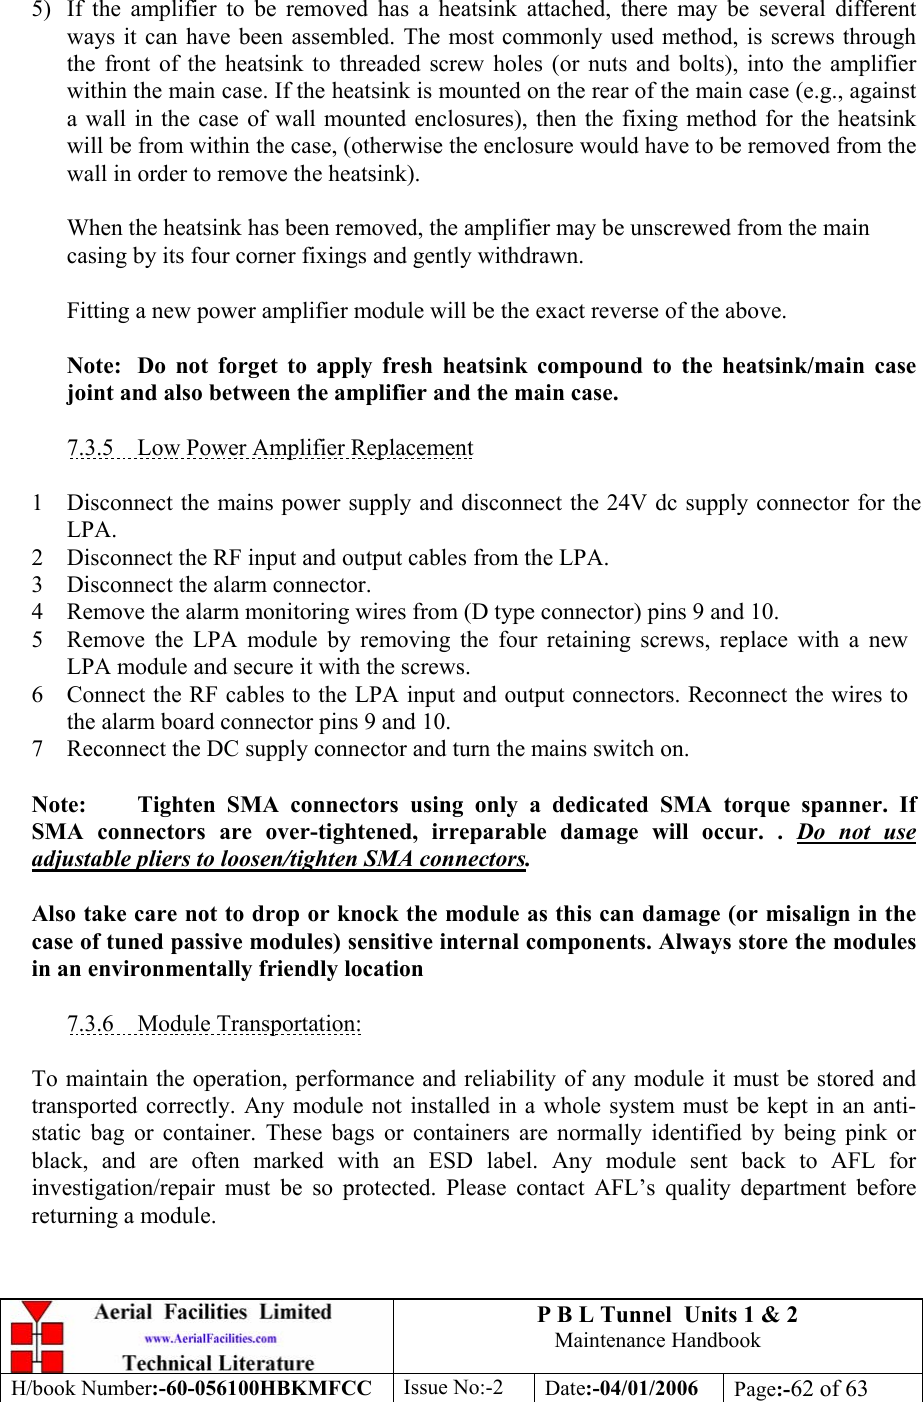 P B L Tunnel  Units 1 &amp; 2 Maintenance Handbook H/book Number:-60-056100HBKMFCC  Issue No:-2  Date:-04/01/2006  Page:-62 of 63   5)  If the amplifier to be removed has a heatsink attached, there may be several different ways it can have been assembled. The most commonly used method, is screws through the front of the heatsink to threaded screw holes (or nuts and bolts), into the amplifier within the main case. If the heatsink is mounted on the rear of the main case (e.g., against a wall in the case of wall mounted enclosures), then the fixing method for the heatsink will be from within the case, (otherwise the enclosure would have to be removed from the wall in order to remove the heatsink).  When the heatsink has been removed, the amplifier may be unscrewed from the main casing by its four corner fixings and gently withdrawn.  Fitting a new power amplifier module will be the exact reverse of the above.  Note:  Do not forget to apply fresh heatsink compound to the heatsink/main case joint and also between the amplifier and the main case.  7.3.5  Low Power Amplifier Replacement  1 Disconnect the mains power supply and disconnect the 24V dc supply connector for the LPA. 2 Disconnect the RF input and output cables from the LPA. 3 Disconnect the alarm connector. 4 Remove the alarm monitoring wires from (D type connector) pins 9 and 10. 5 Remove the LPA module by removing the four retaining screws, replace with a new LPA module and secure it with the screws. 6 Connect the RF cables to the LPA input and output connectors. Reconnect the wires to the alarm board connector pins 9 and 10. 7 Reconnect the DC supply connector and turn the mains switch on.  Note:  Tighten SMA connectors using only a dedicated SMA torque spanner. If SMA connectors are over-tightened, irreparable damage will occur. . Do not use adjustable pliers to loosen/tighten SMA connectors.  Also take care not to drop or knock the module as this can damage (or misalign in the case of tuned passive modules) sensitive internal components. Always store the modules in an environmentally friendly location  7.3.6 Module Transportation:  To maintain the operation, performance and reliability of any module it must be stored and transported correctly. Any module not installed in a whole system must be kept in an anti-static bag or container. These bags or containers are normally identified by being pink or black, and are often marked with an ESD label. Any module sent back to AFL for investigation/repair must be so protected. Please contact AFL’s quality department before returning a module. 